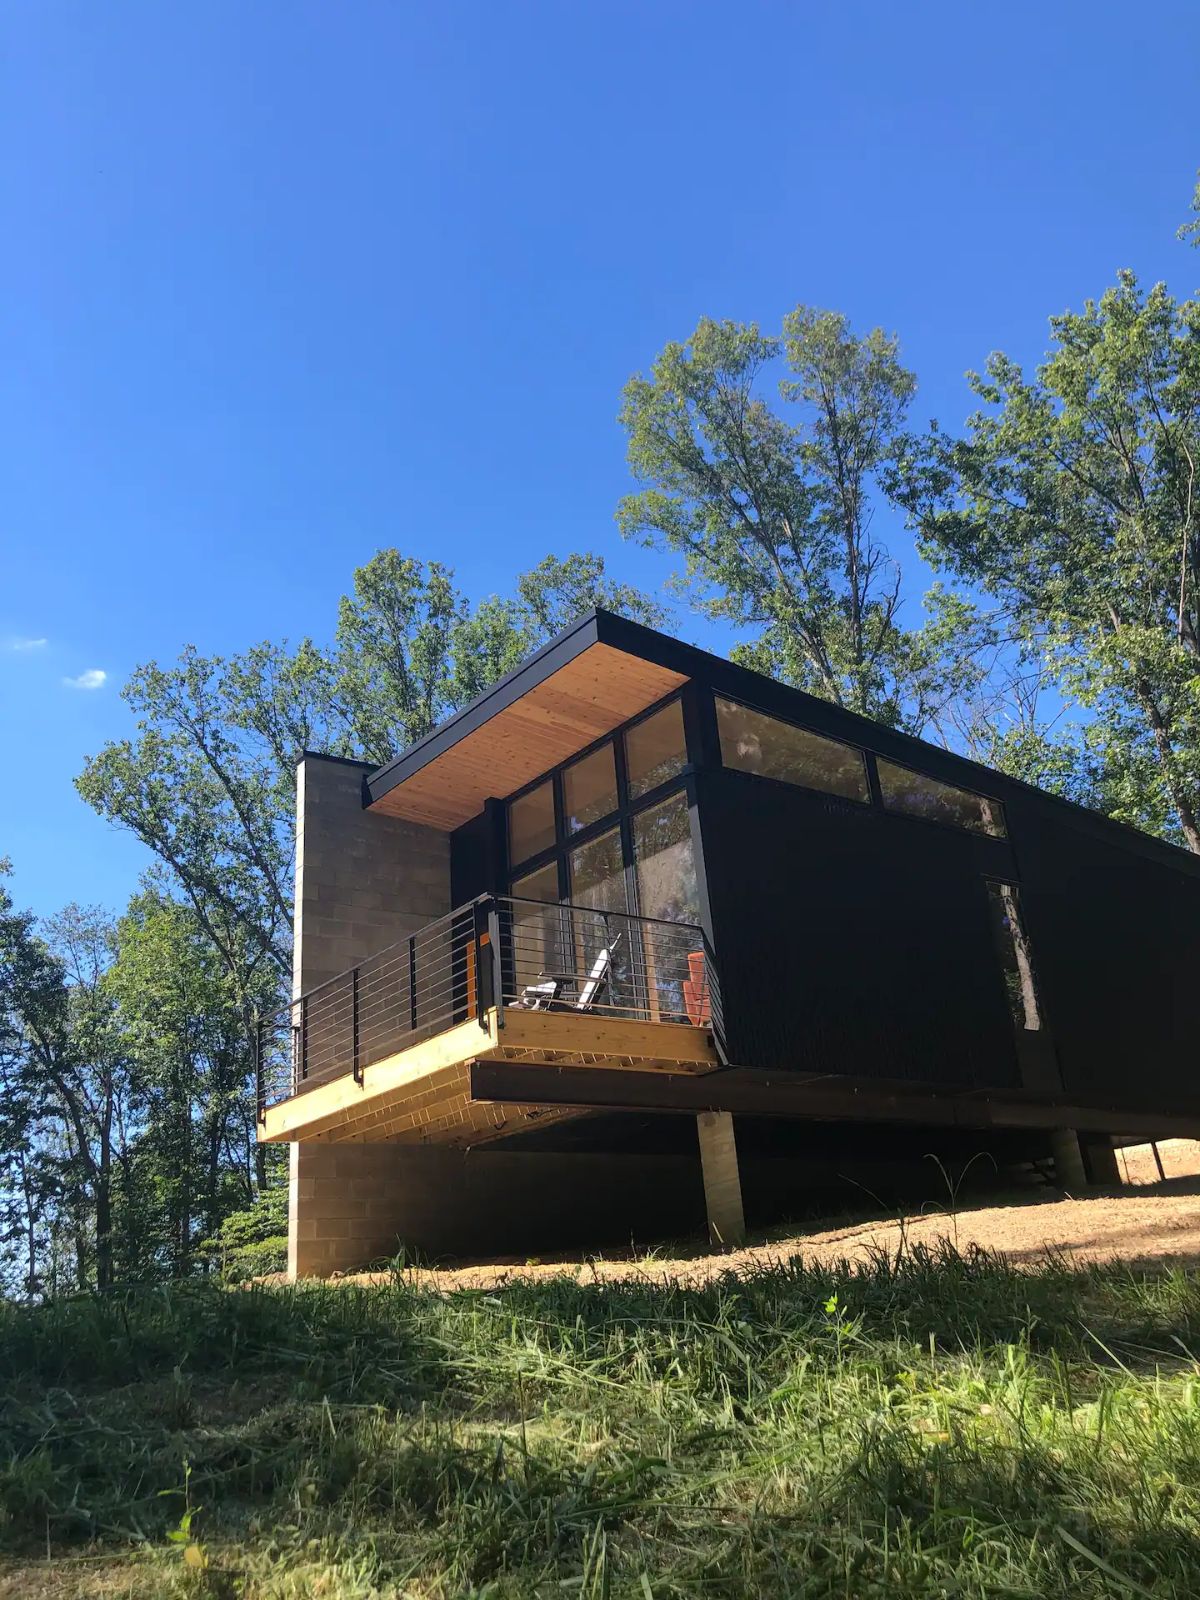 black tiny home with brown and concrete accents on balcony